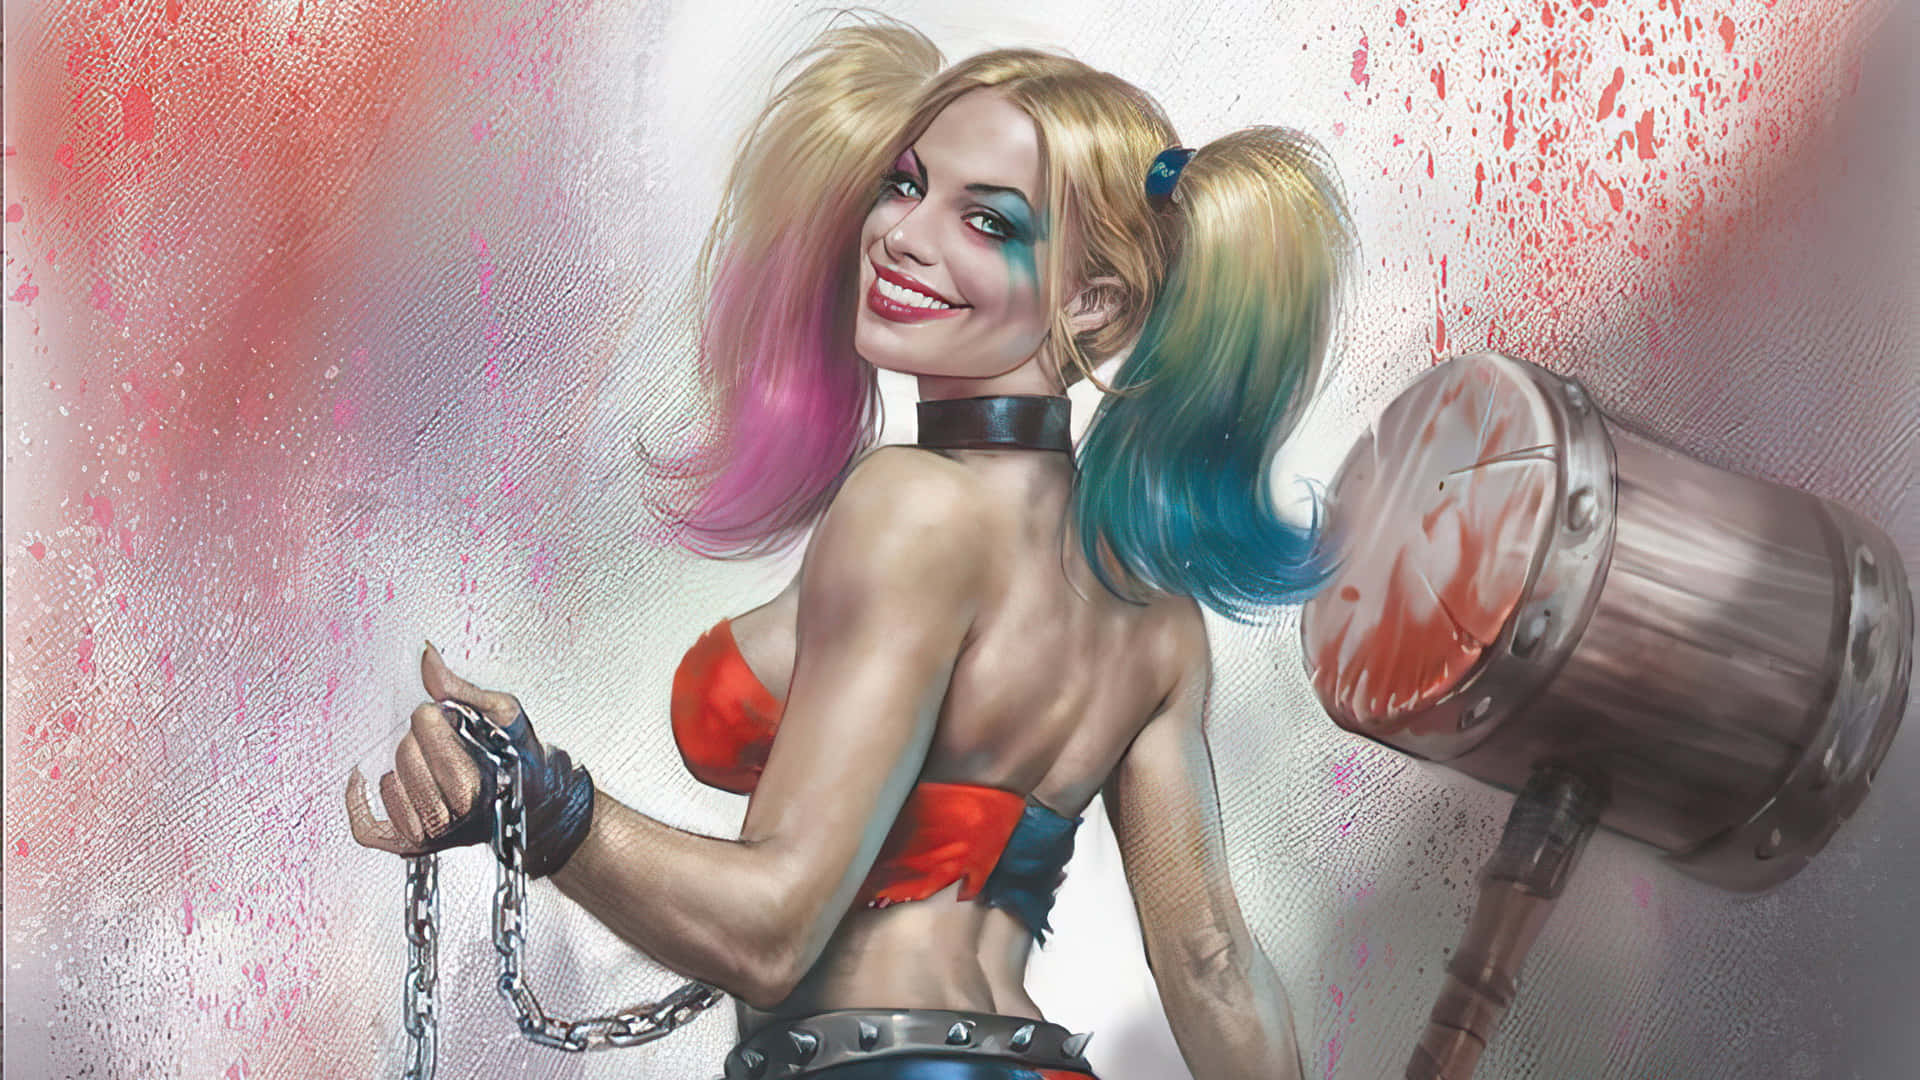 Caption: Harley Quinn striking a fierce pose with her signature hammer Wallpaper